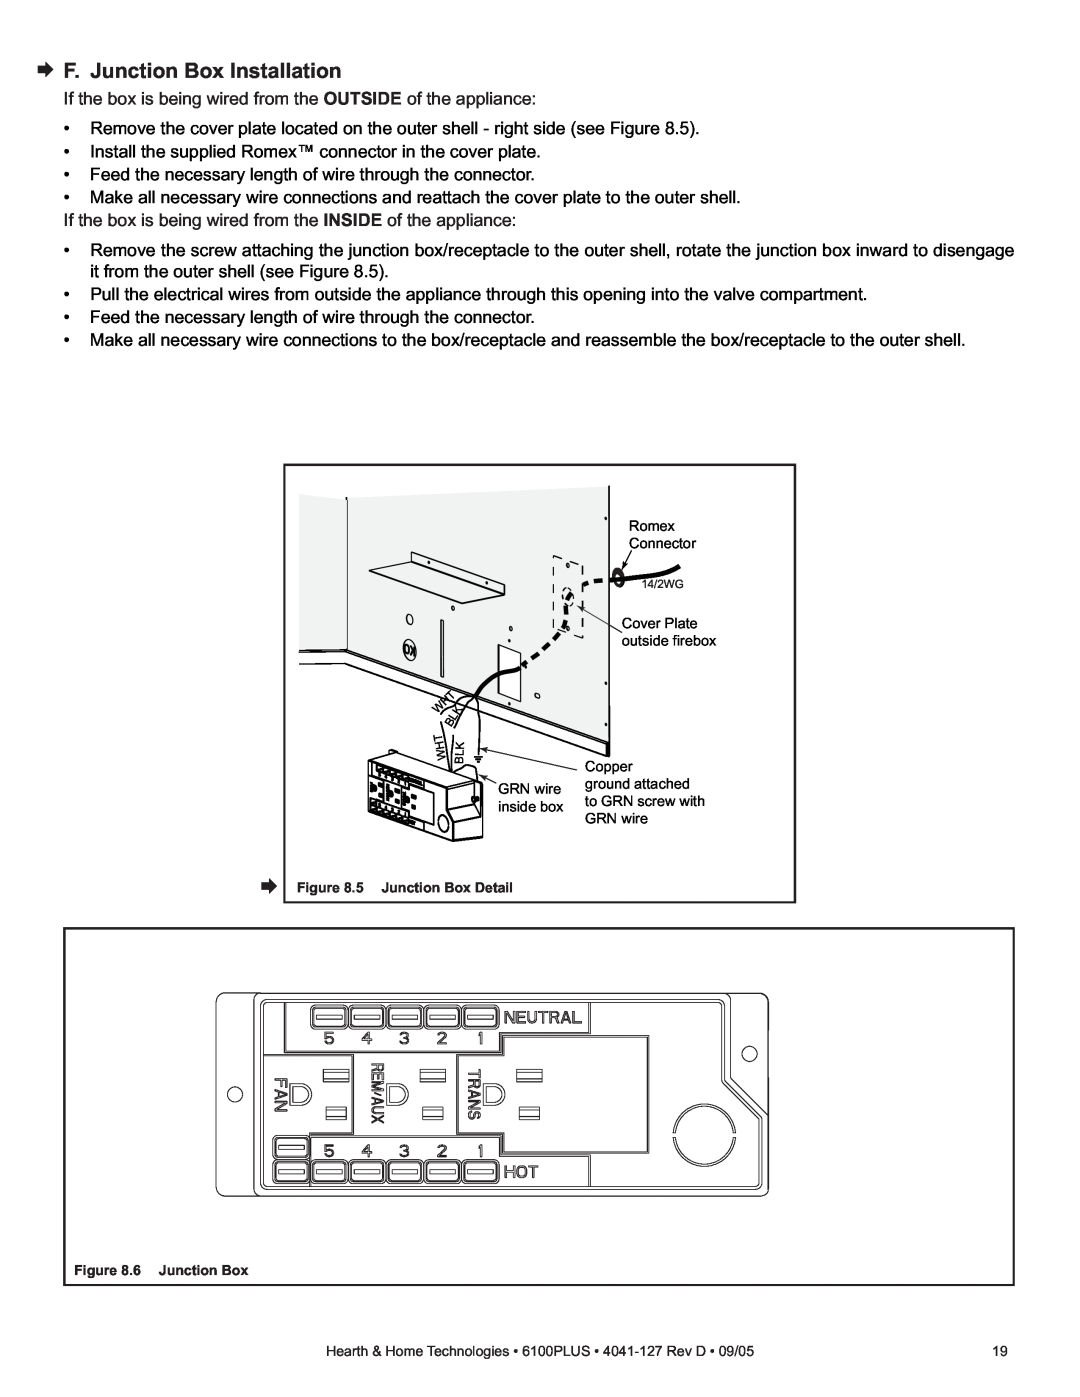 Heat & Glo LifeStyle 6100PLUS owner manual F. Junction Box Installation, 5 Junction Box Detail, 6 Junction Box 